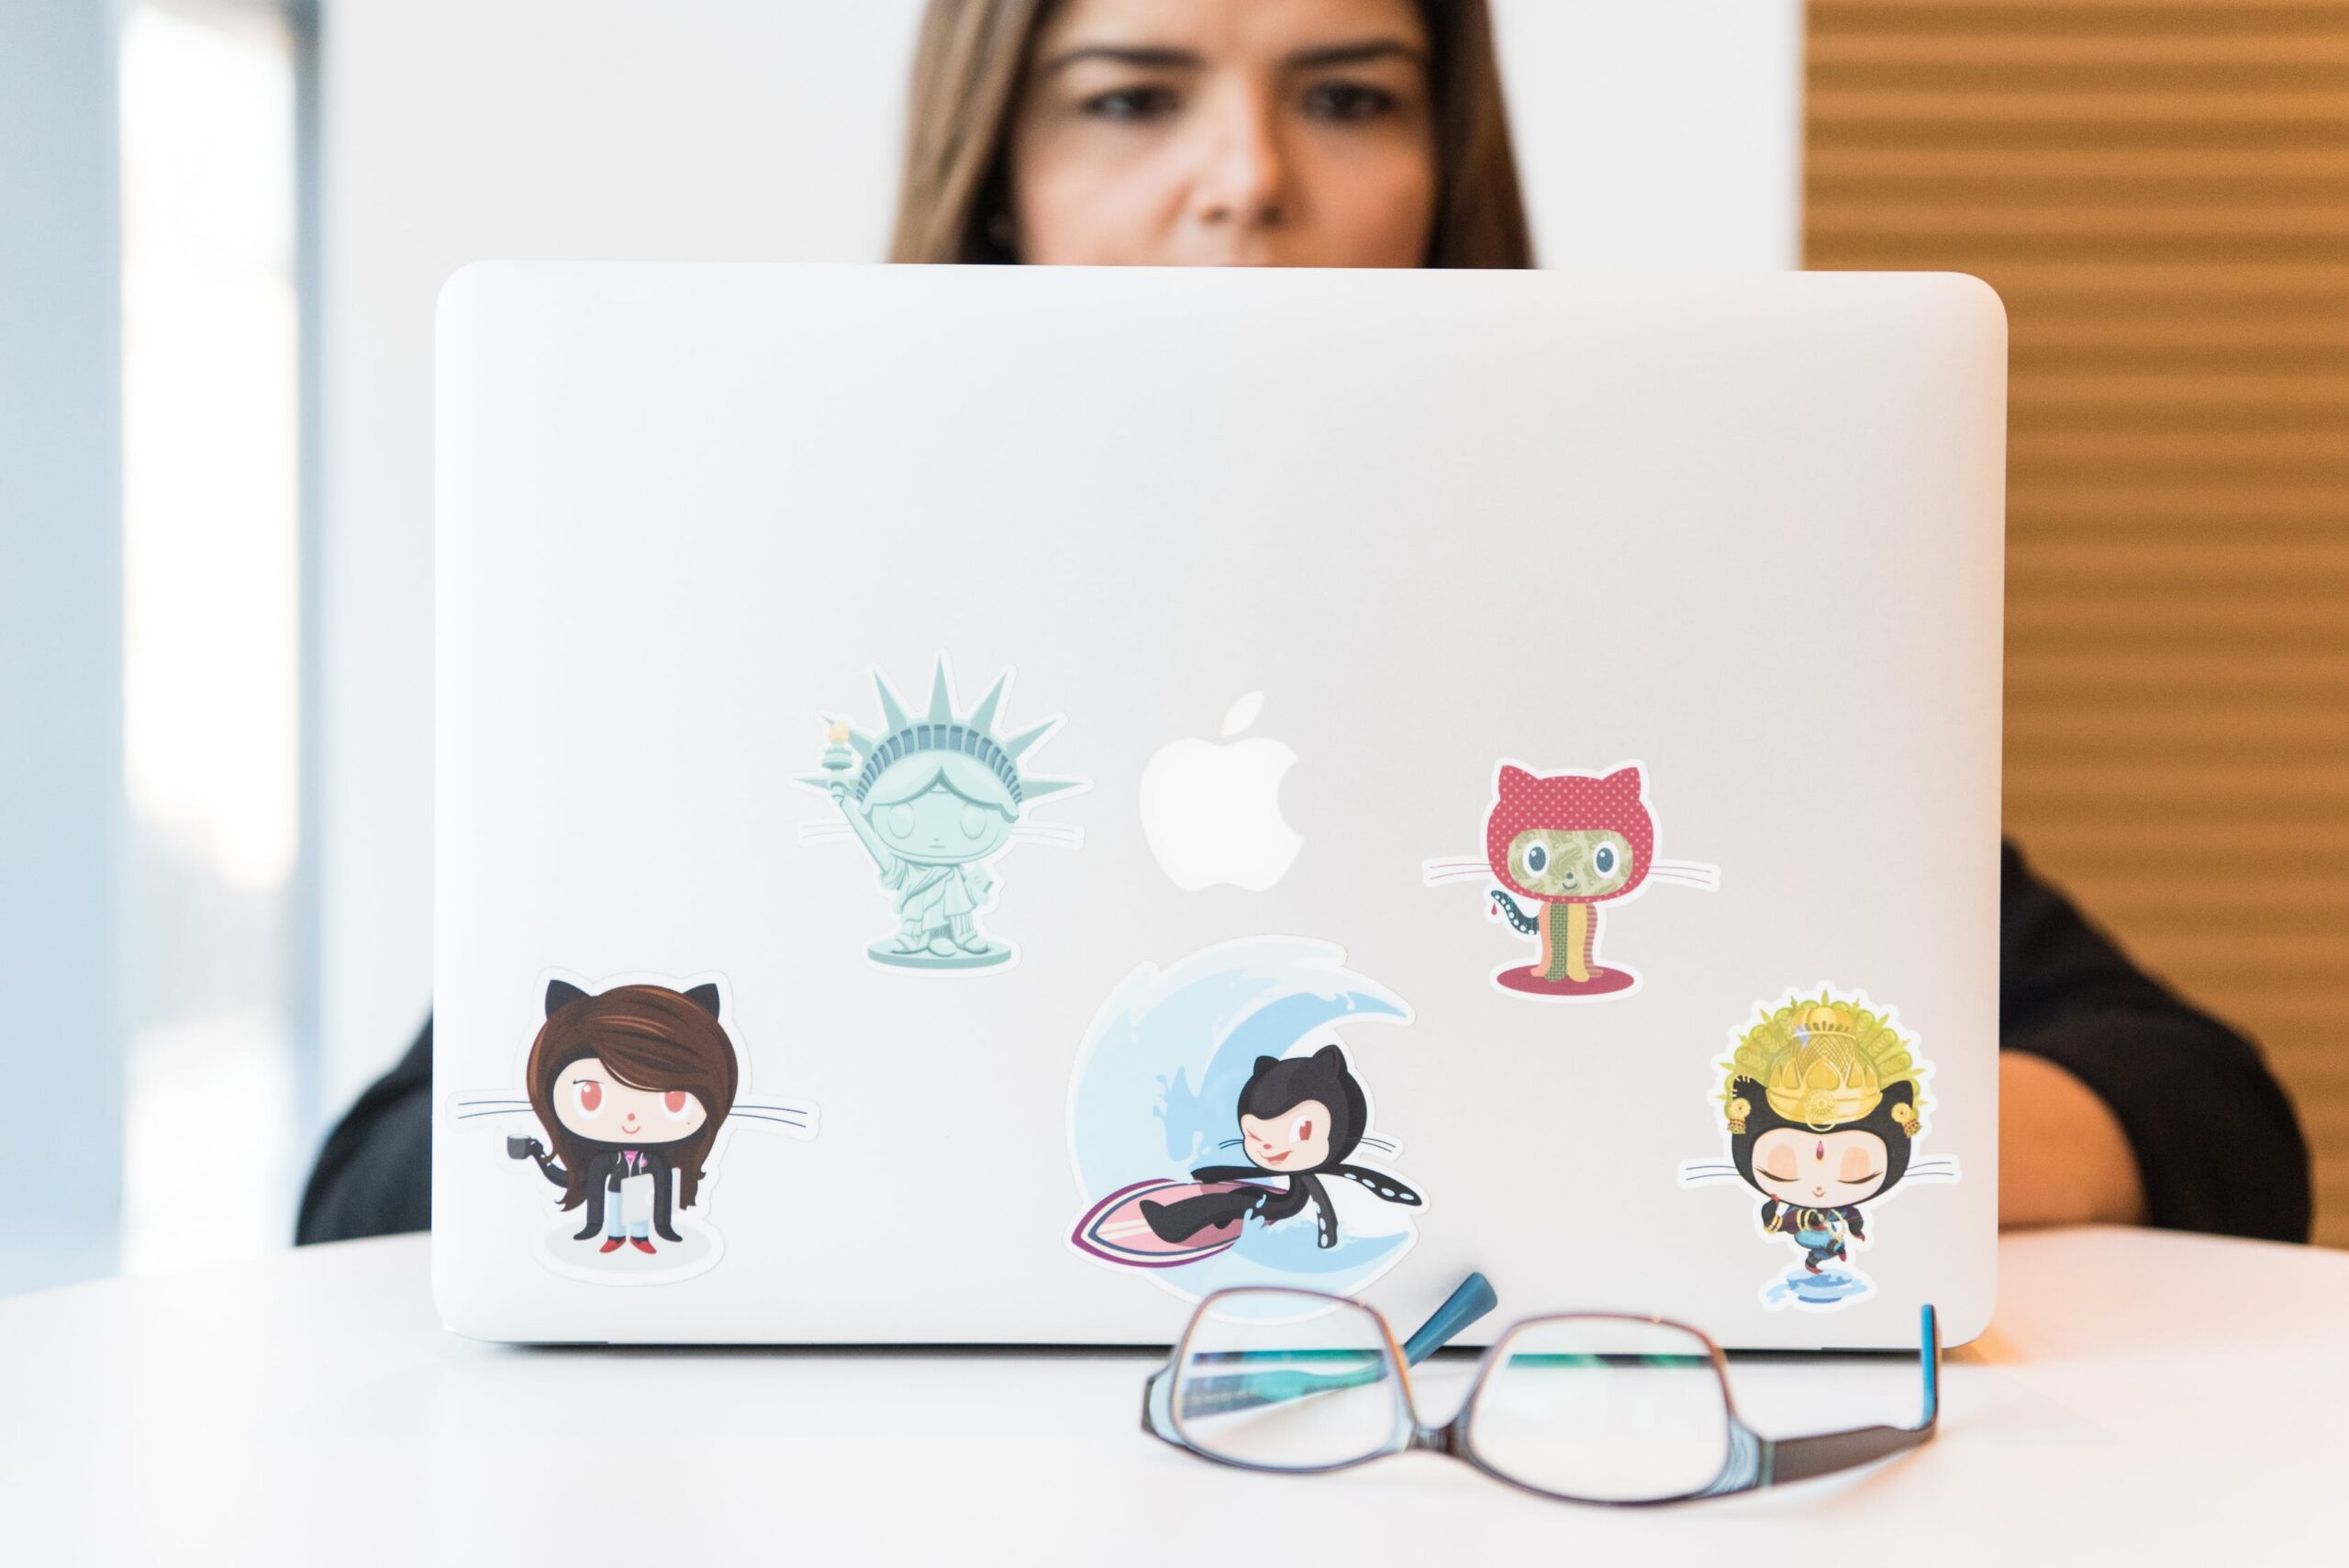 How to Make Custom Stickers Yourself: The Complete Guide